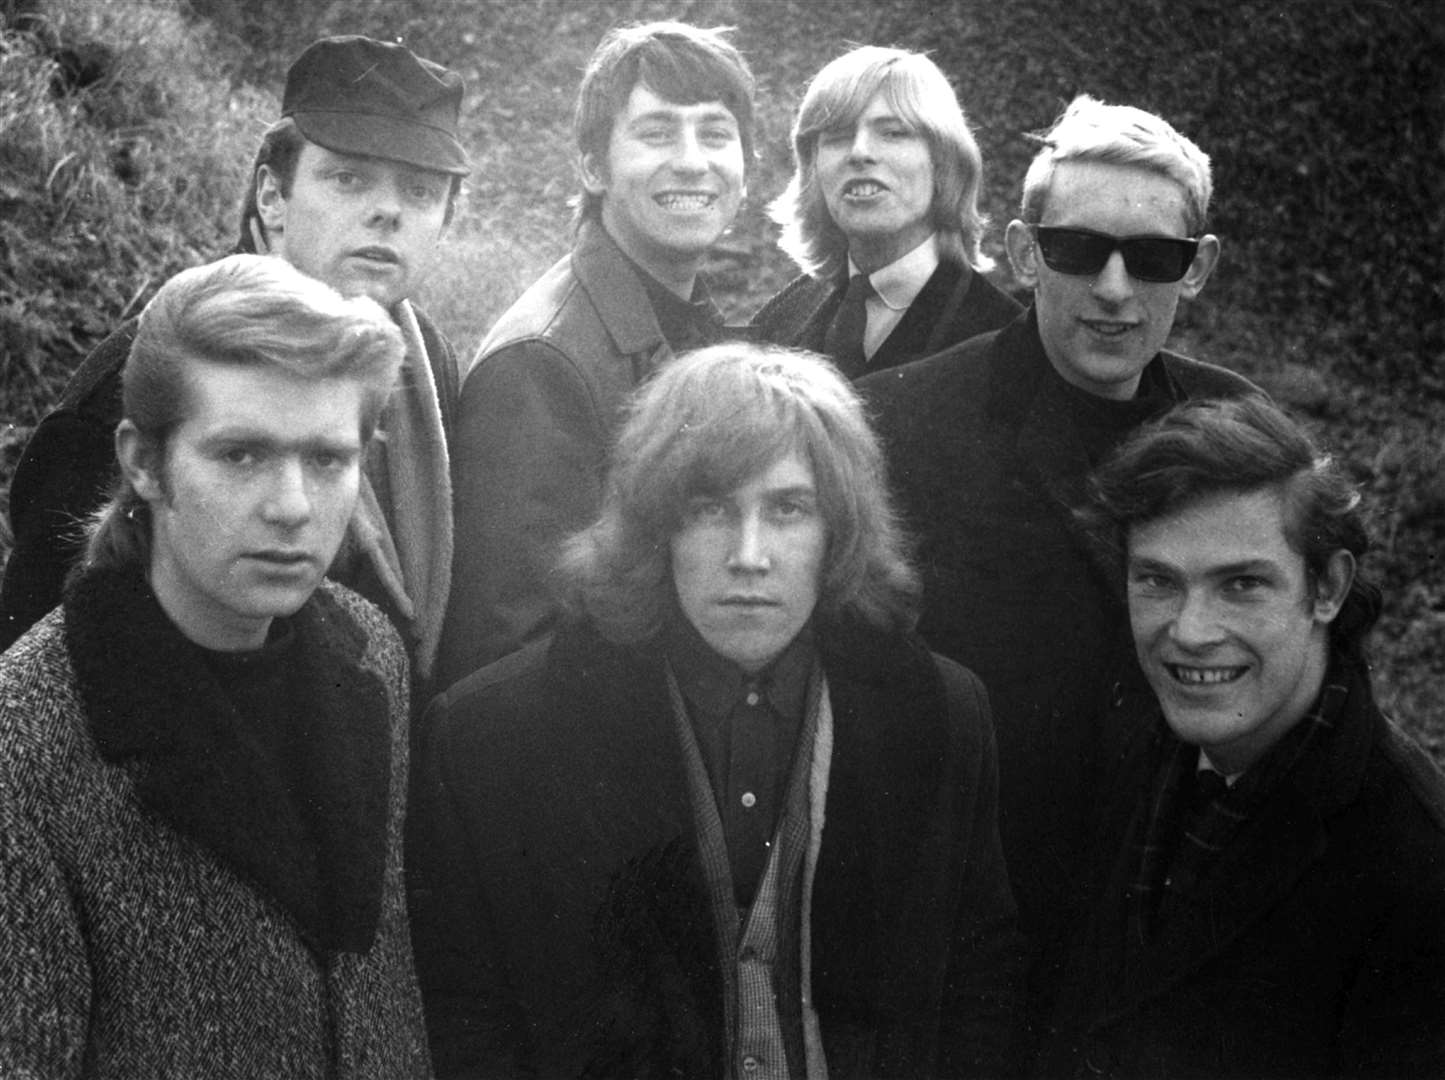 Bob Solly in 1964 centre left and next to David Bowie with other members of the Manish Boys in Mote Park. Image: Bob Solly